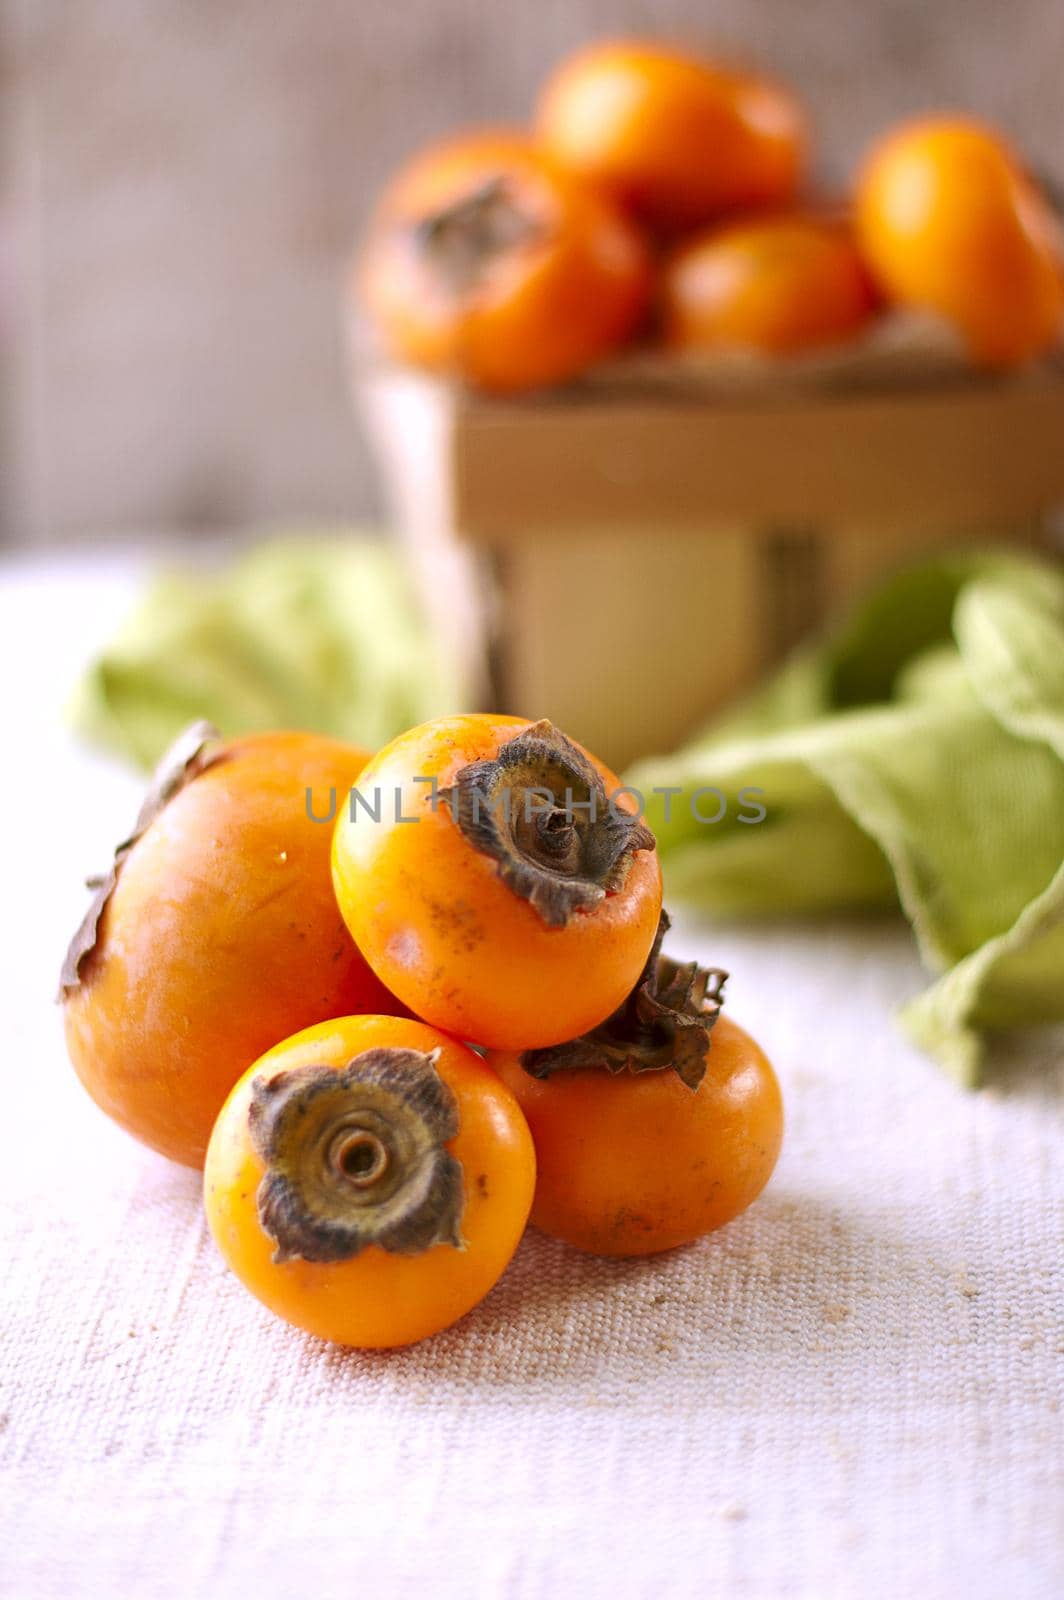 persimmons in a basket and scattered on the table. rustic style. High quality photo